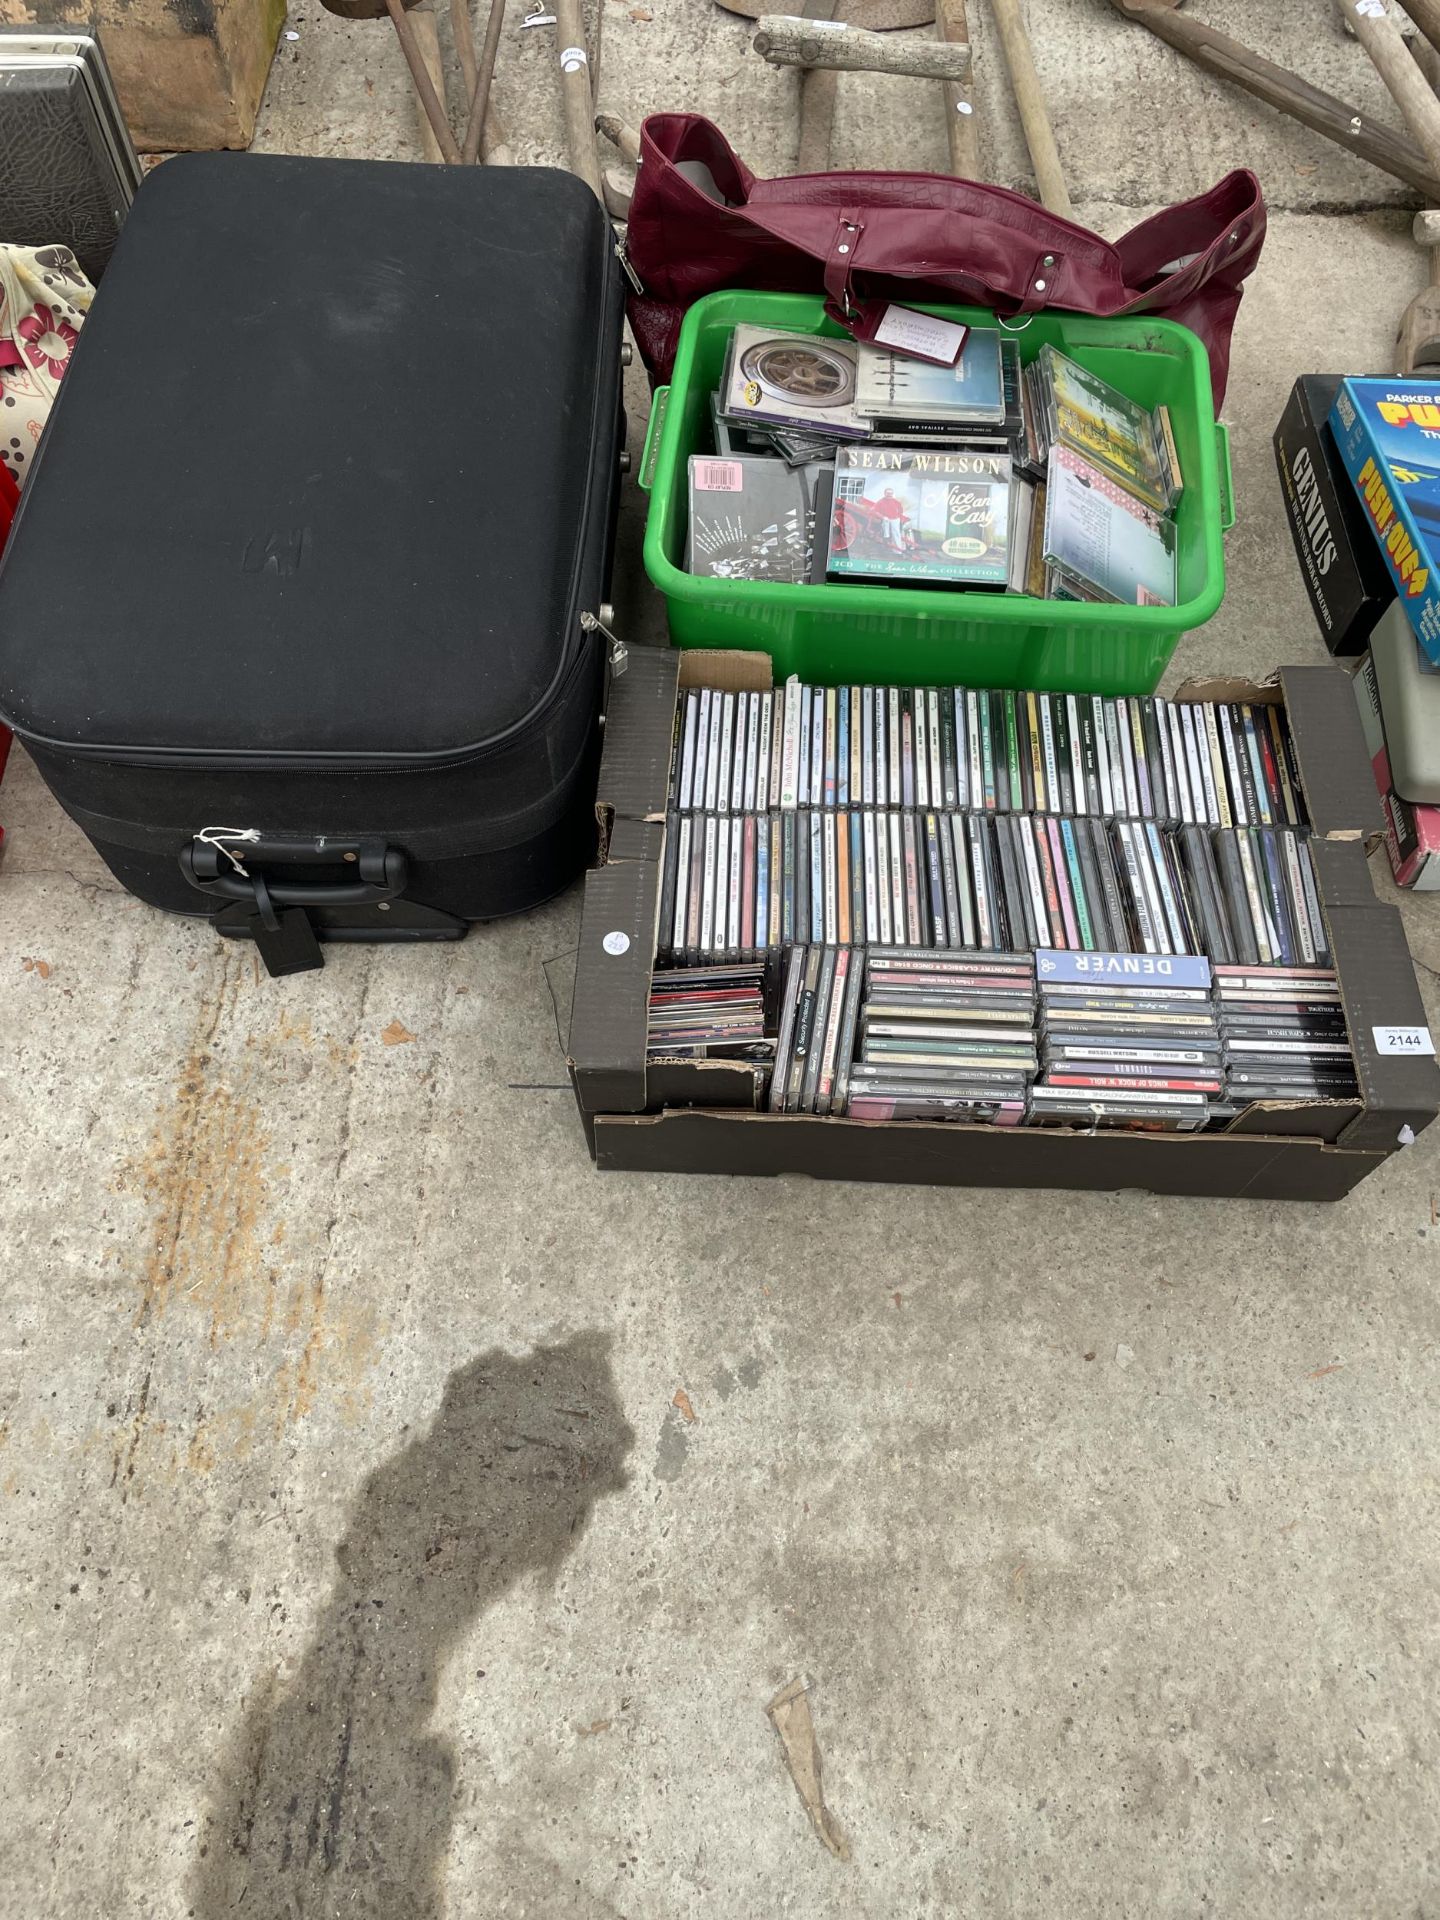 AN EXTREMELY LARGE COLLECTION OF CDS